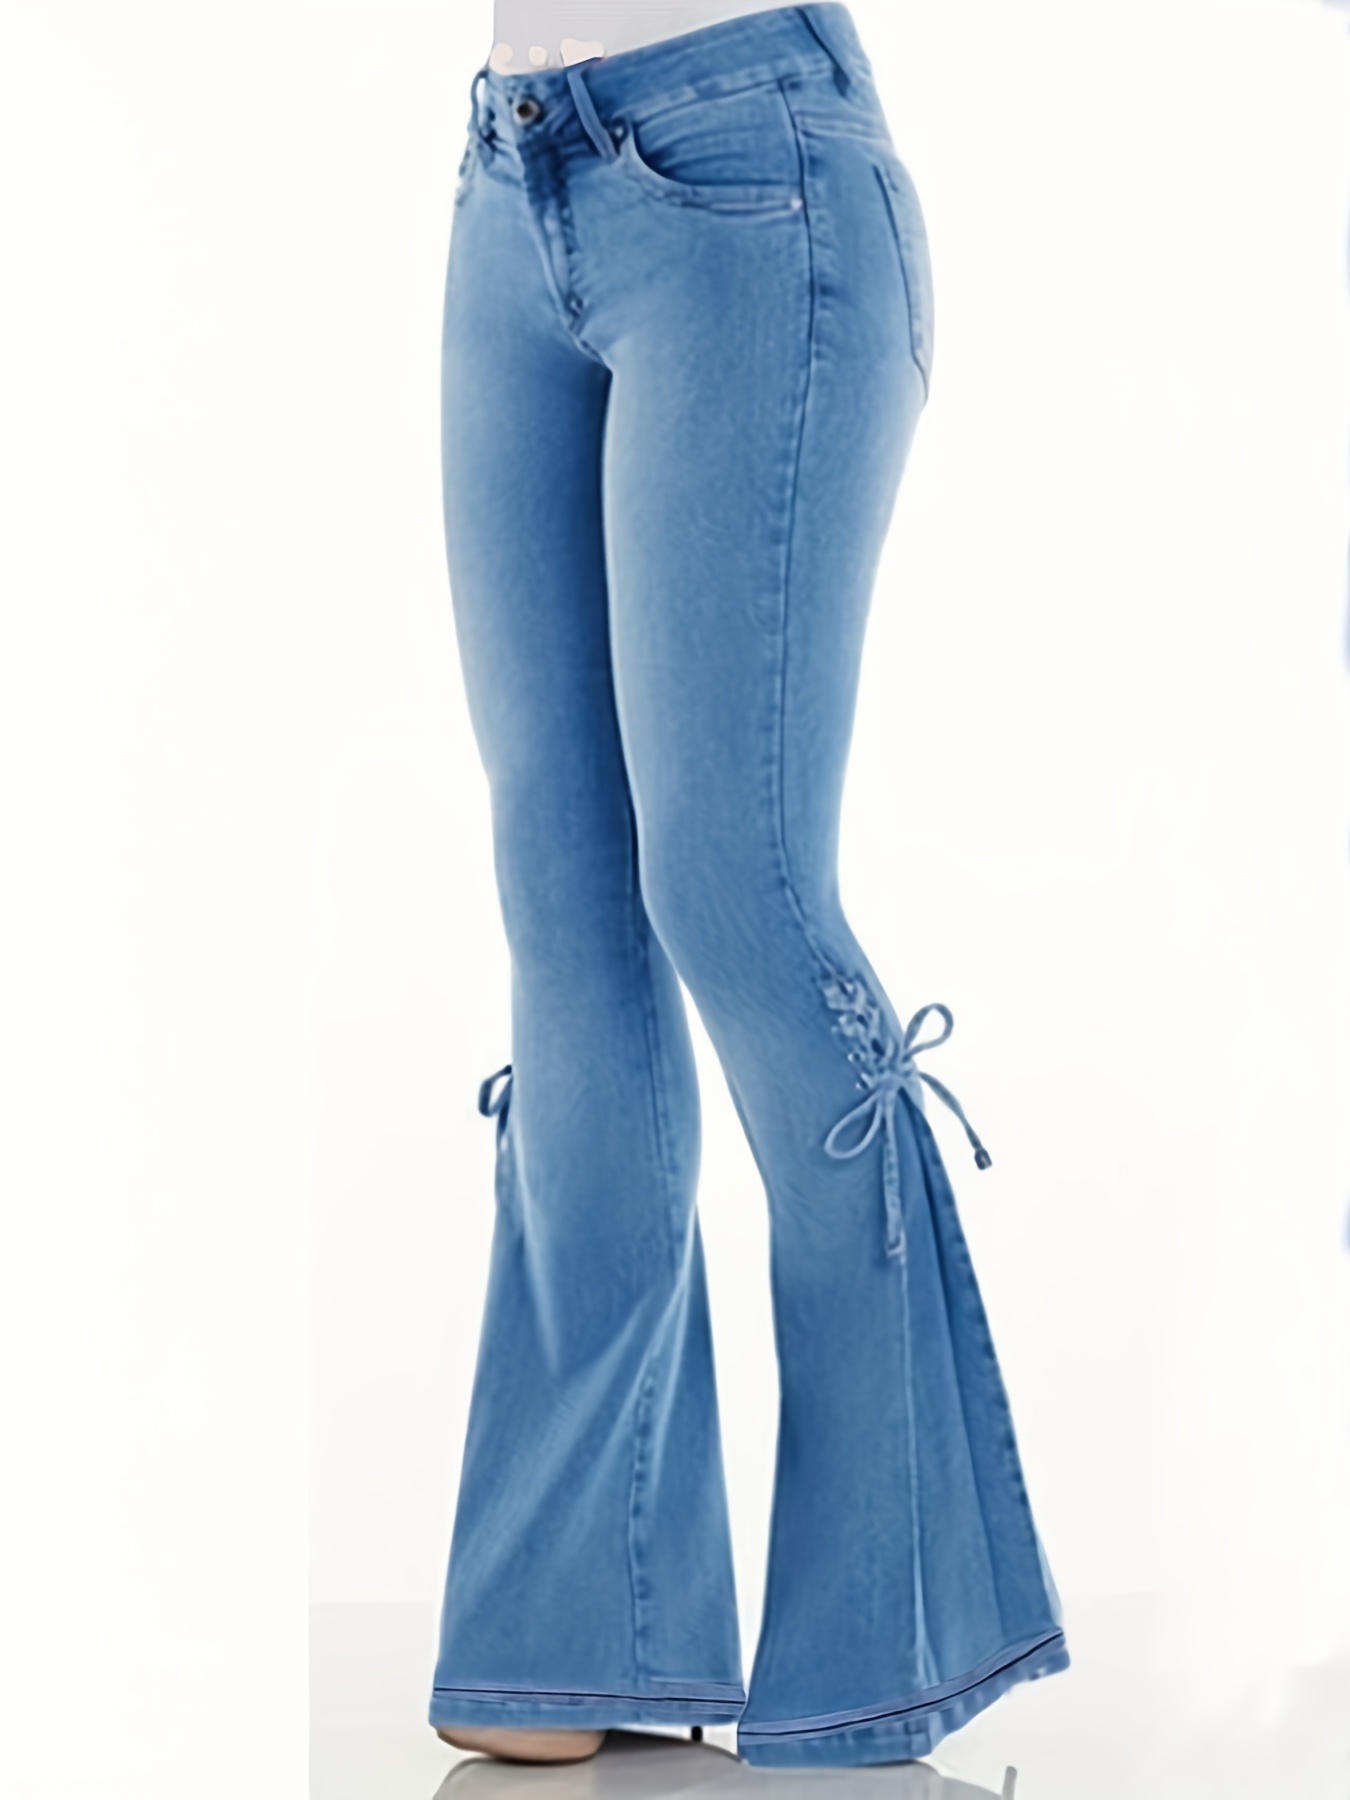 Jeans for Women Women's Casual High-Waist Lace-Up Denim Trousers Slim  Stretch Jeans Trousers Womens Jeans Light blue XL